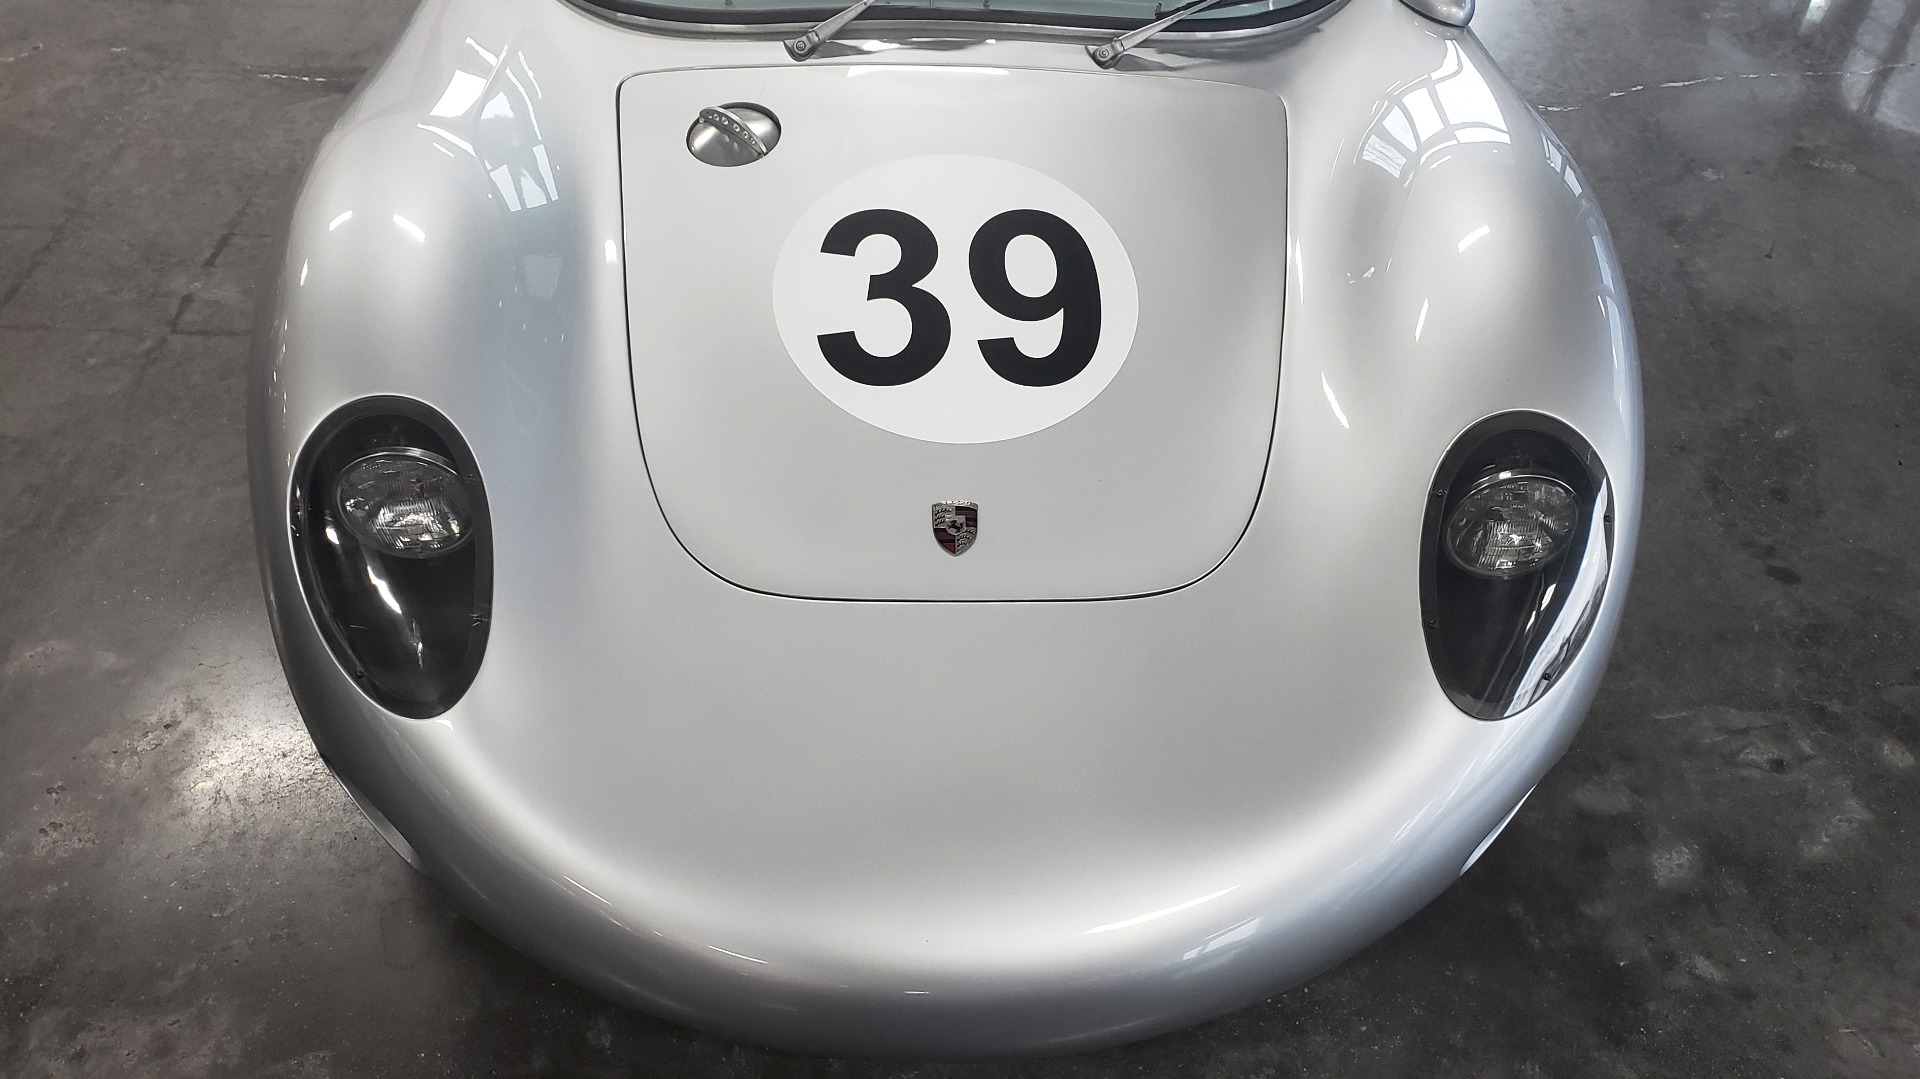 Used 1959 Porsche 718 RSK SPYDER REPLICA / 2275CC W/44MM WEBER (160HP) / 4-SPD MANUAL for sale Sold at Formula Imports in Charlotte NC 28227 54